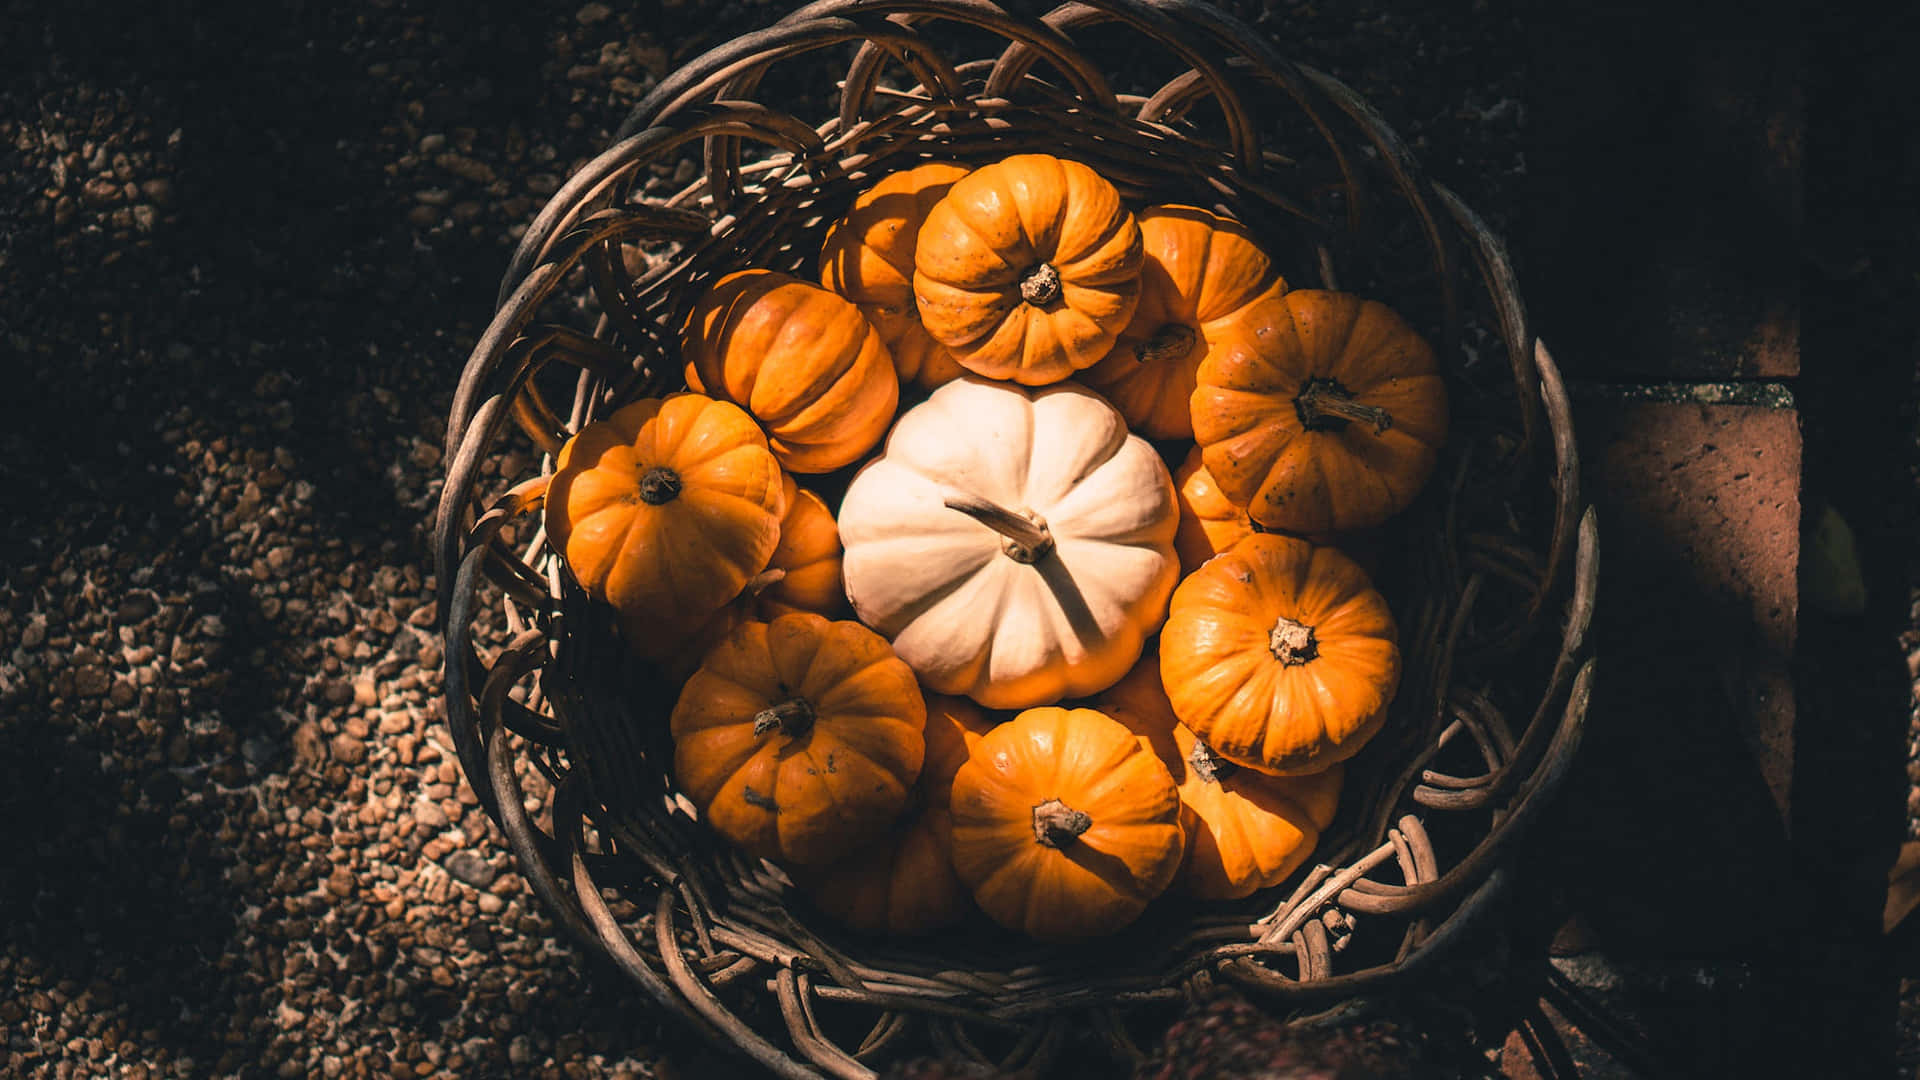 An autumnal harvest scene with a vibrant orange pumpkin surrounded by fallen leaves